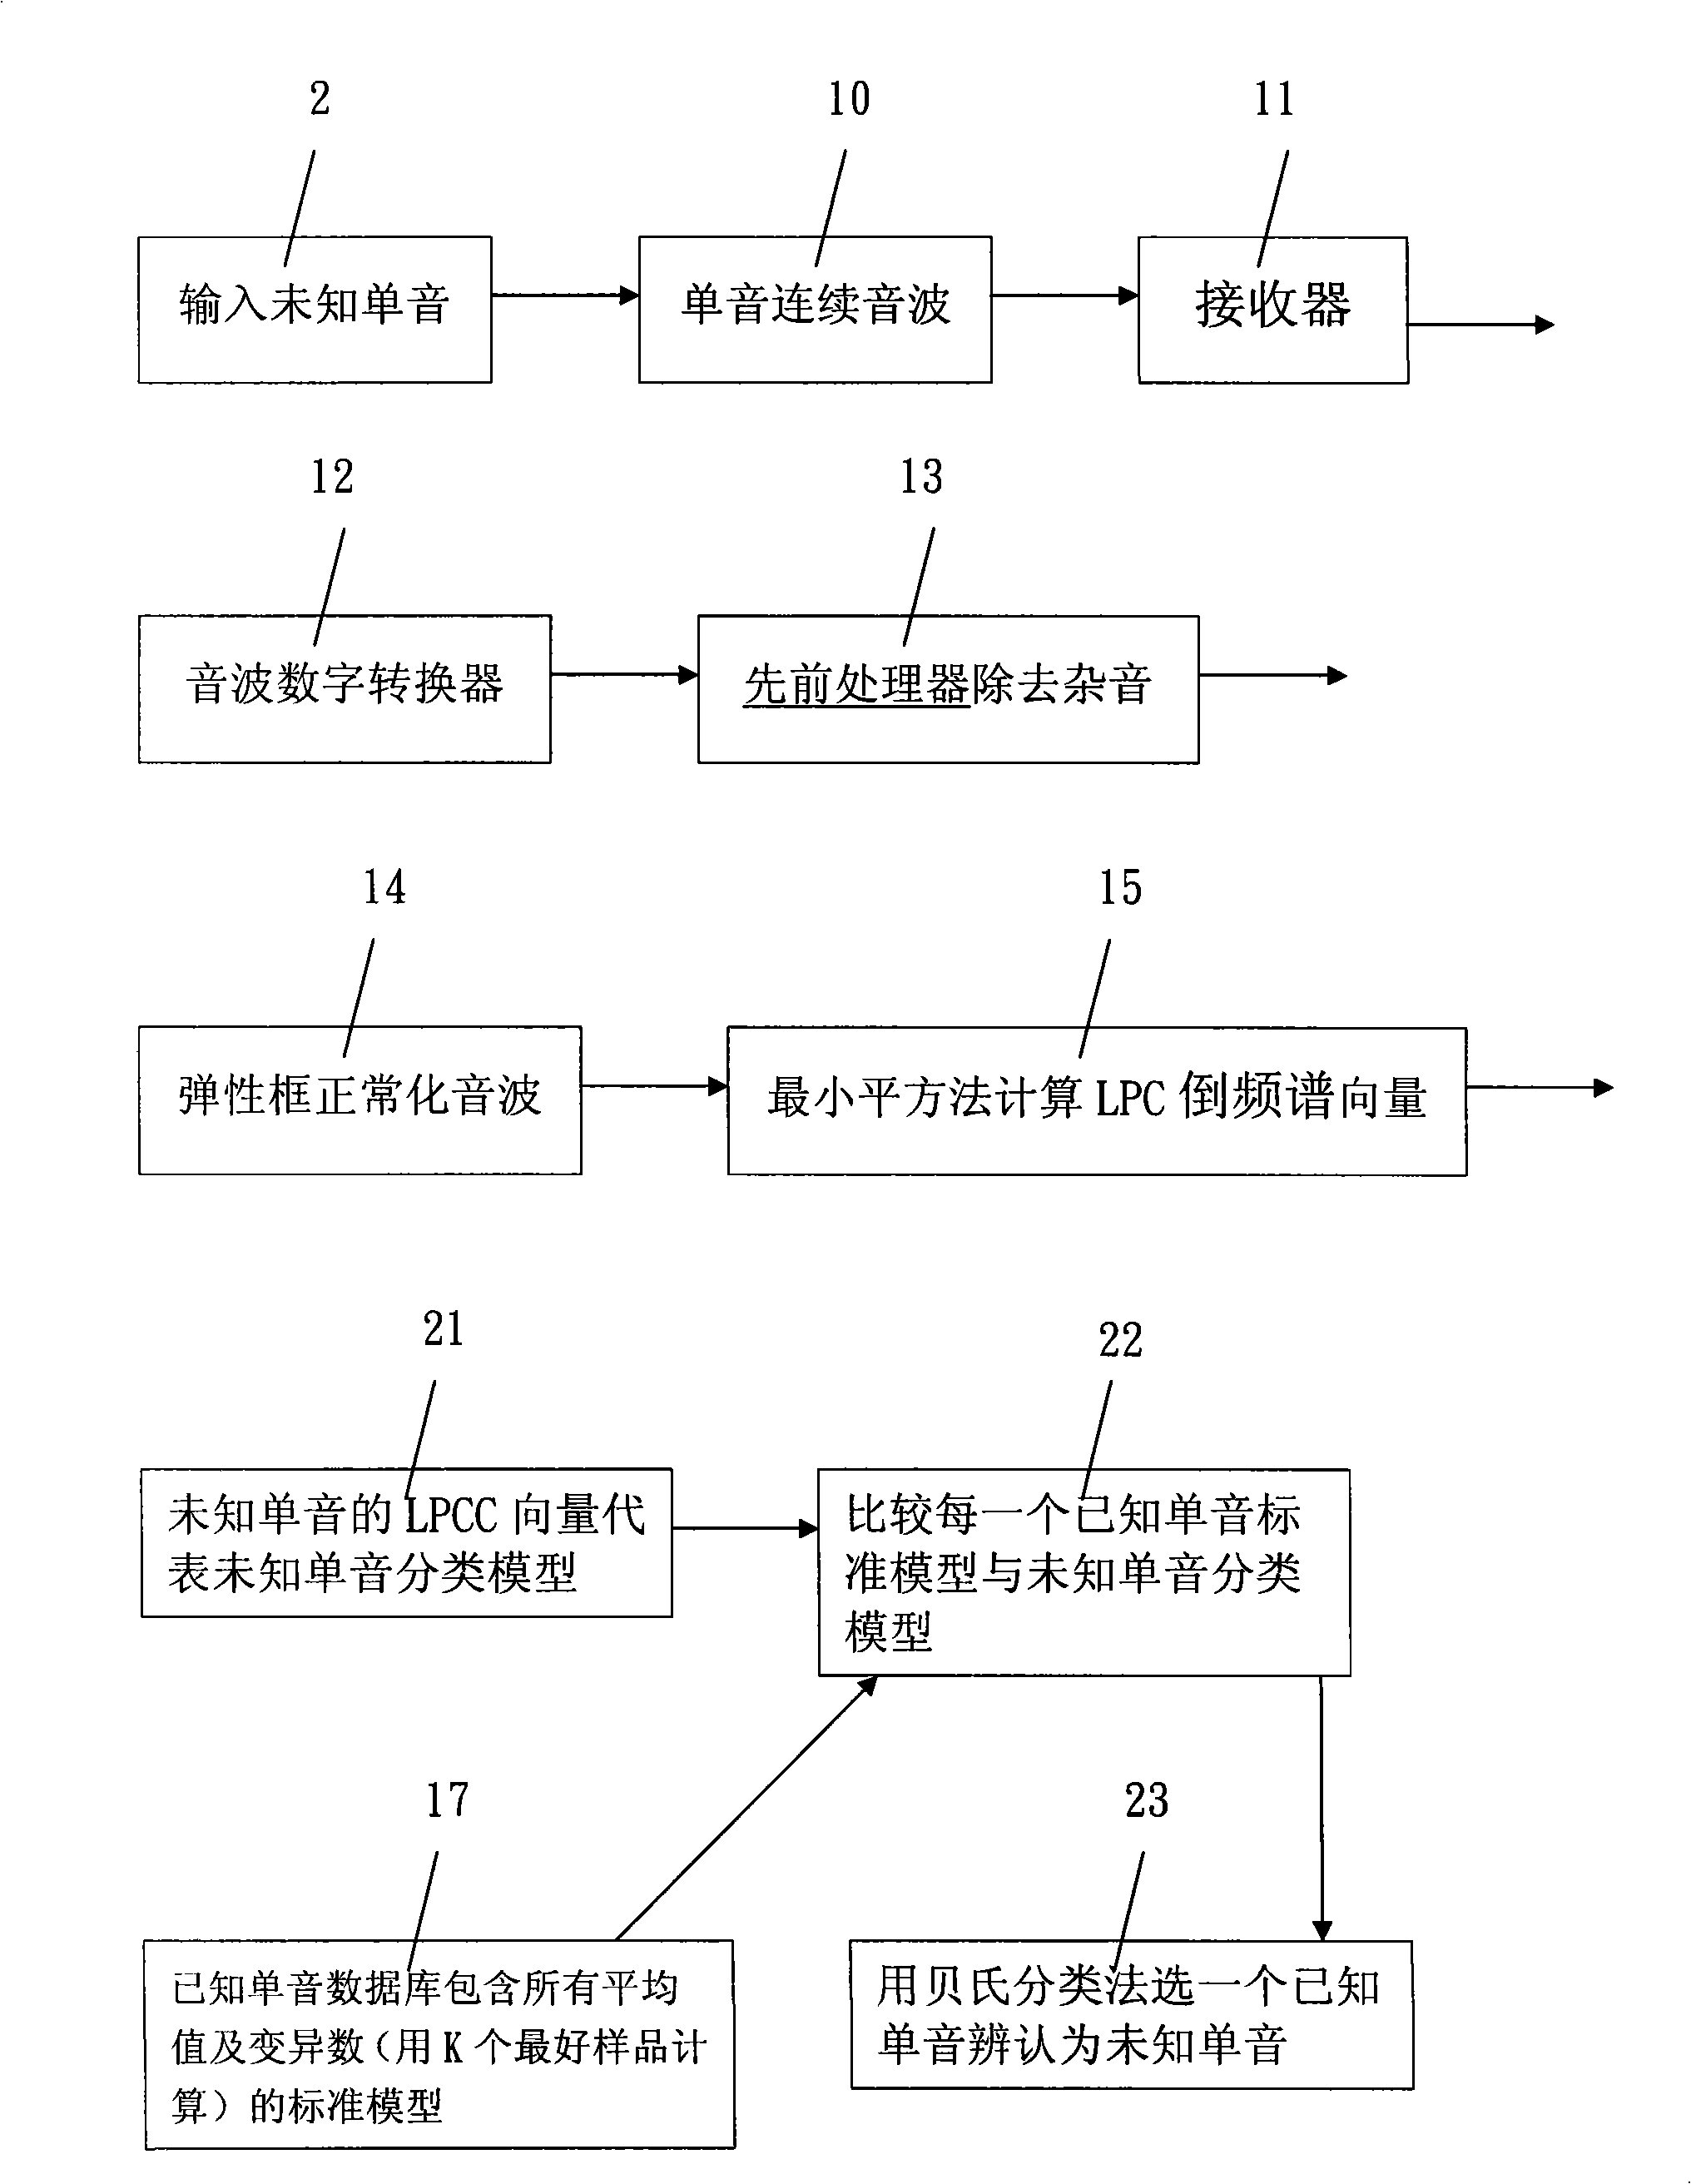 National language single tone recognizing system capable of wide application